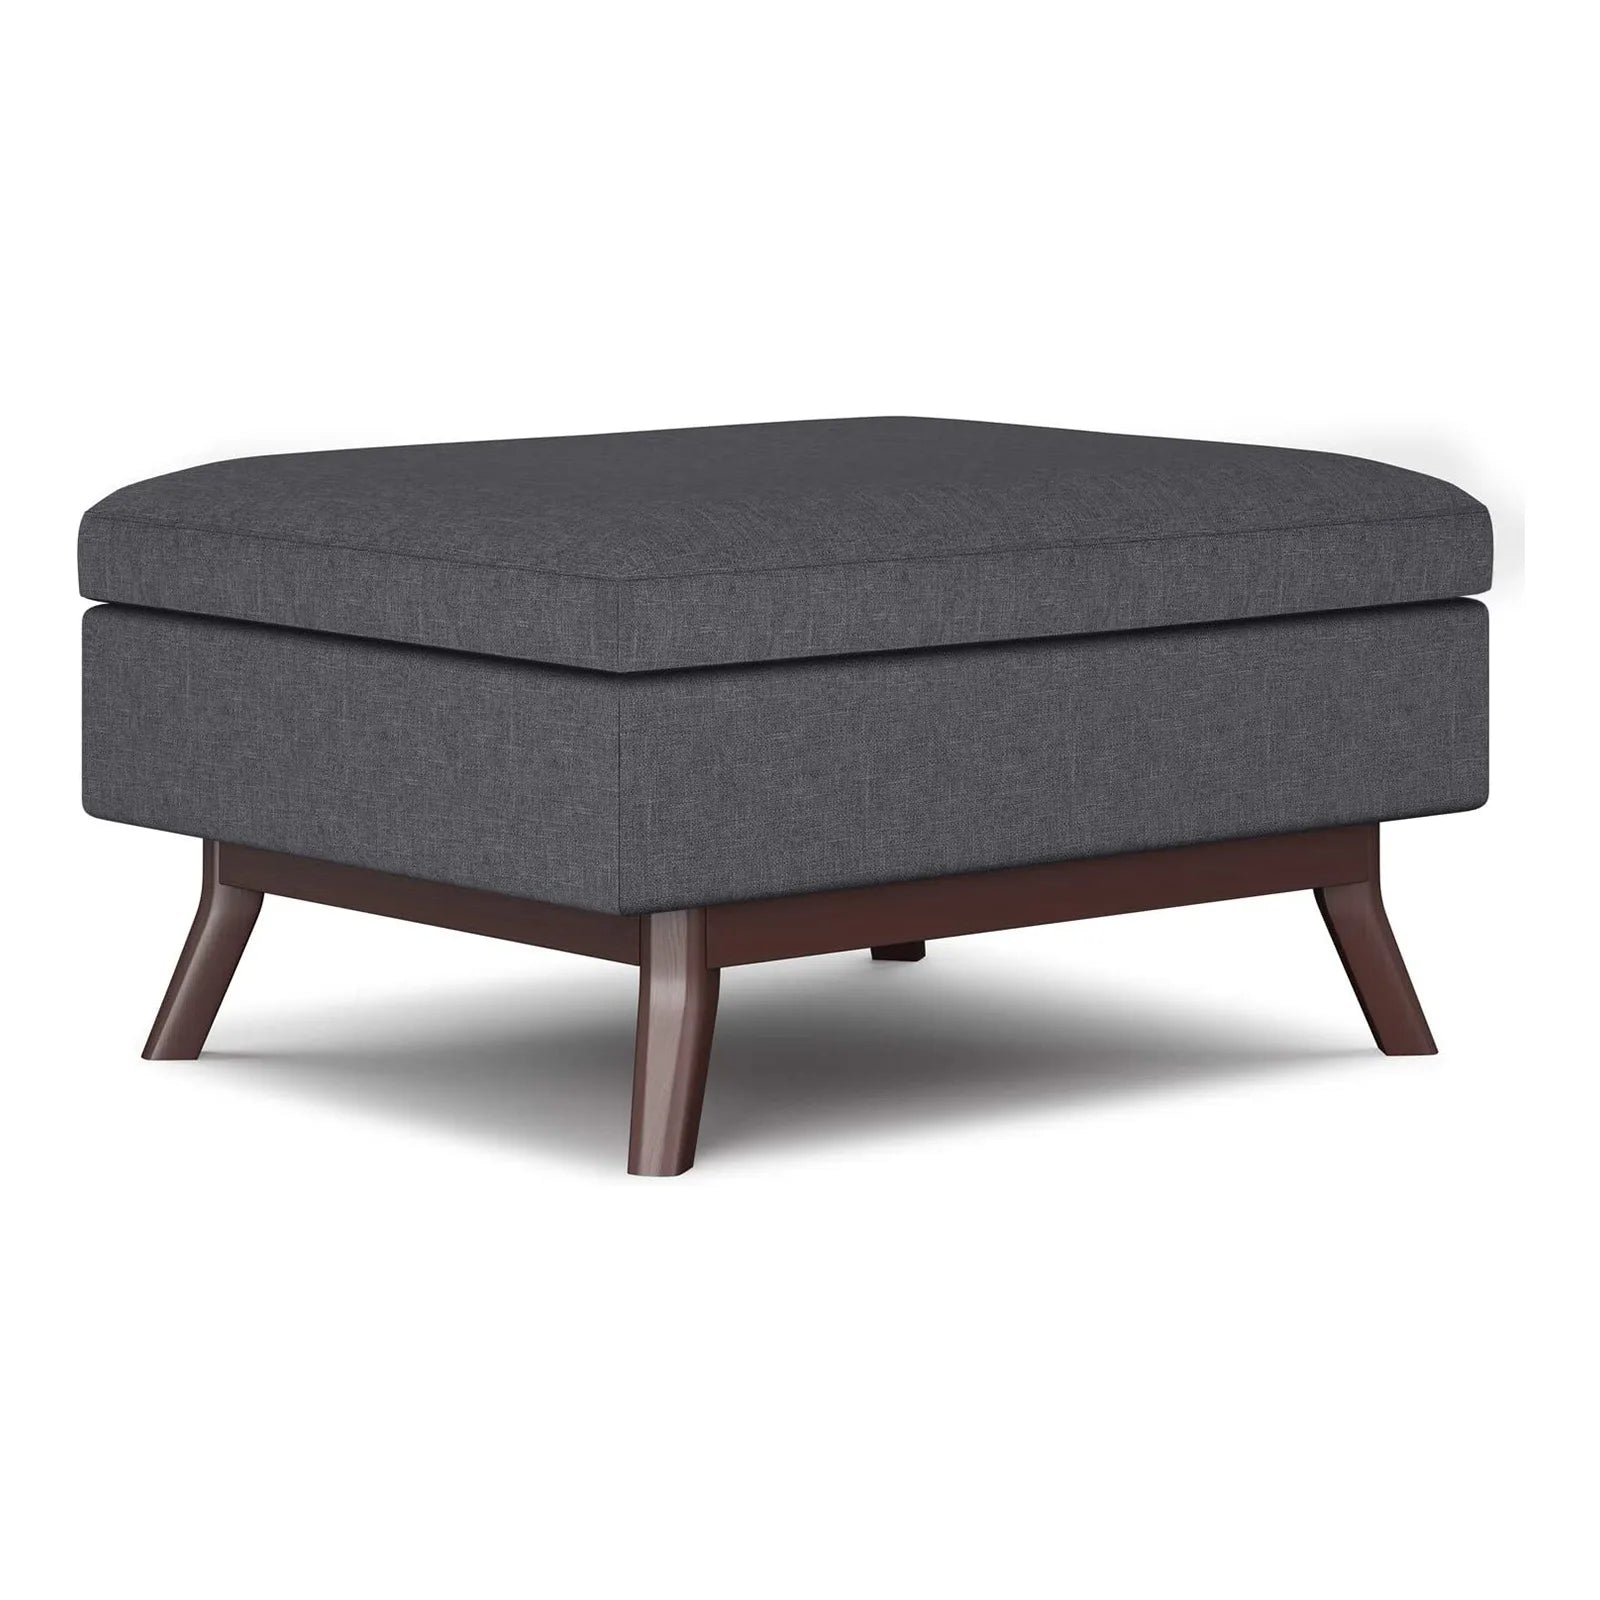 Coffee Table Lift Top Upholstered Storage Ottoman